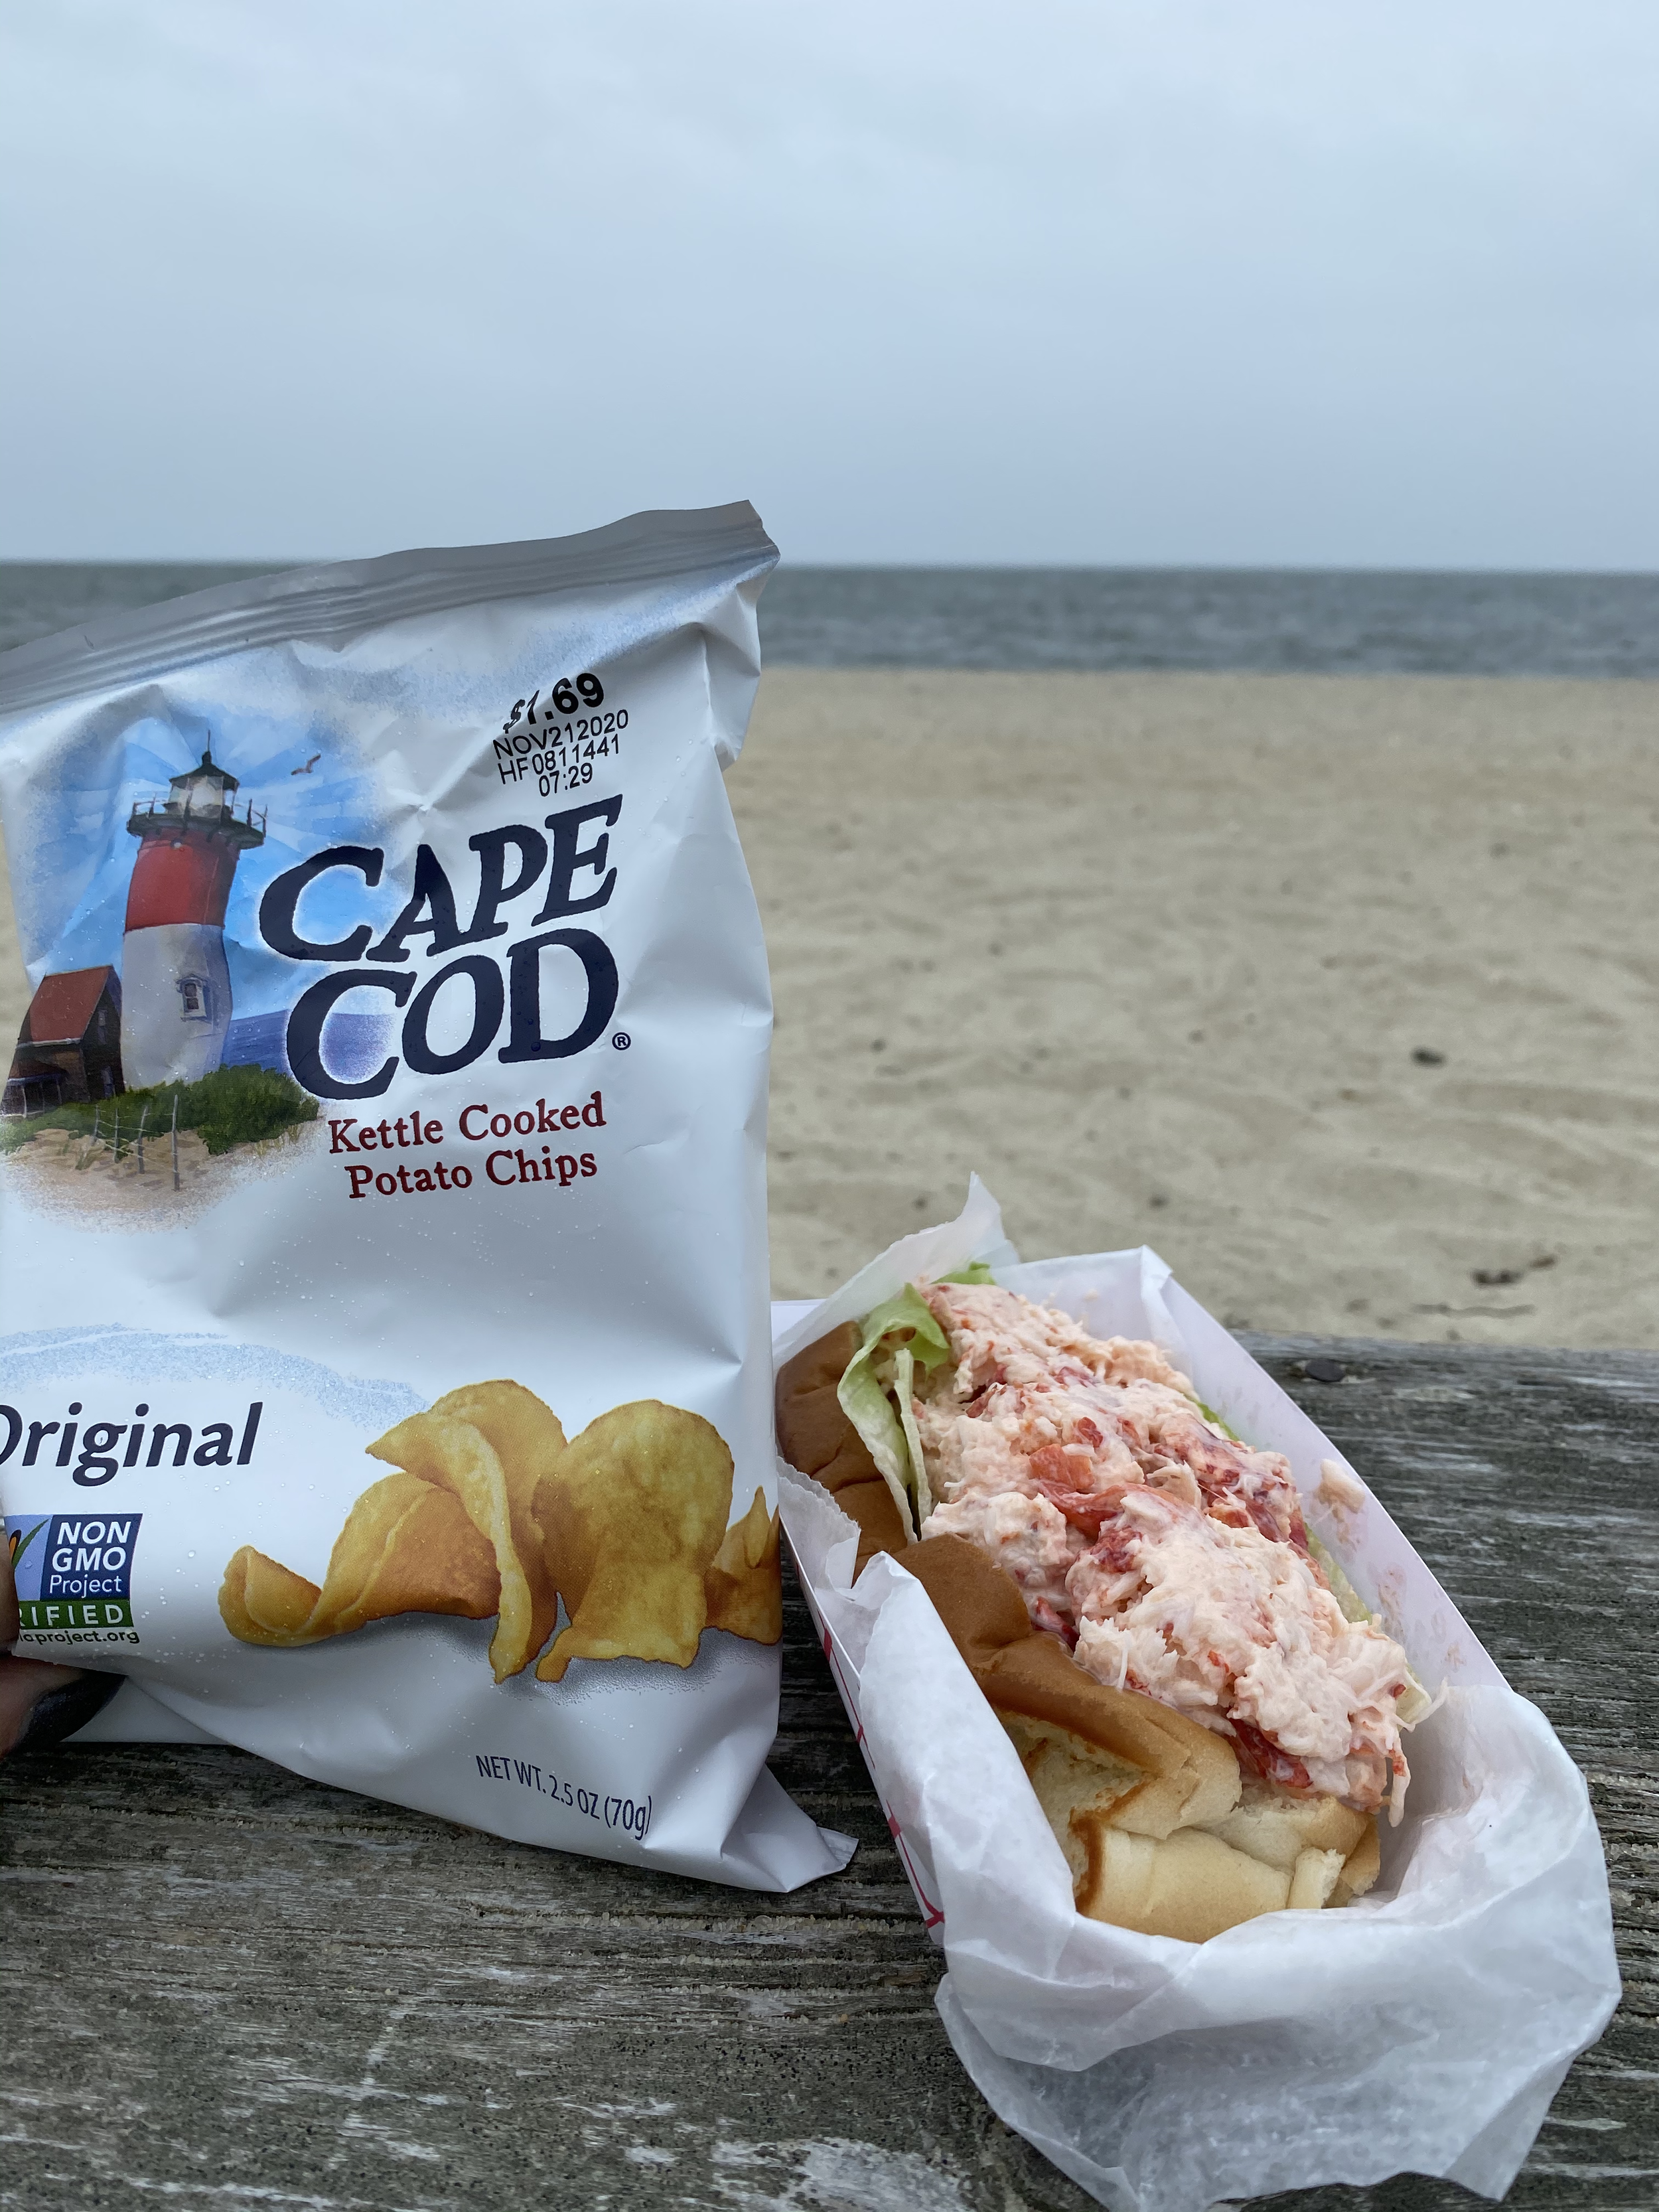 Where to eat on Cape Cod